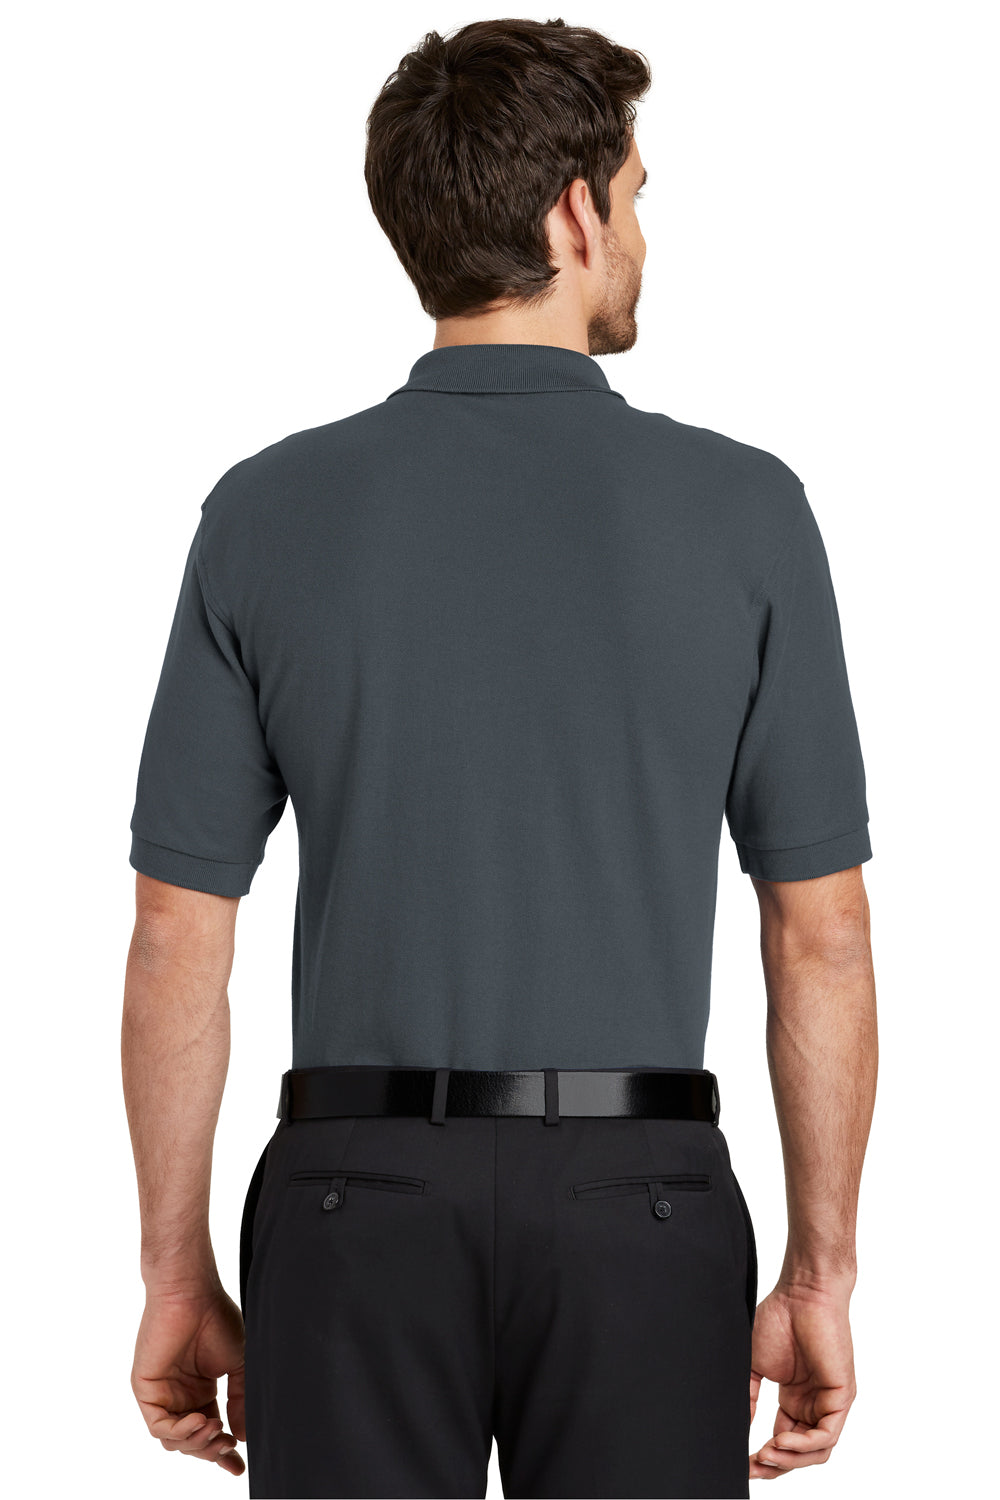 Port Authority K500 Mens Silk Touch Wrinkle Resistant Short Sleeve Polo Shirt Steel Grey Back